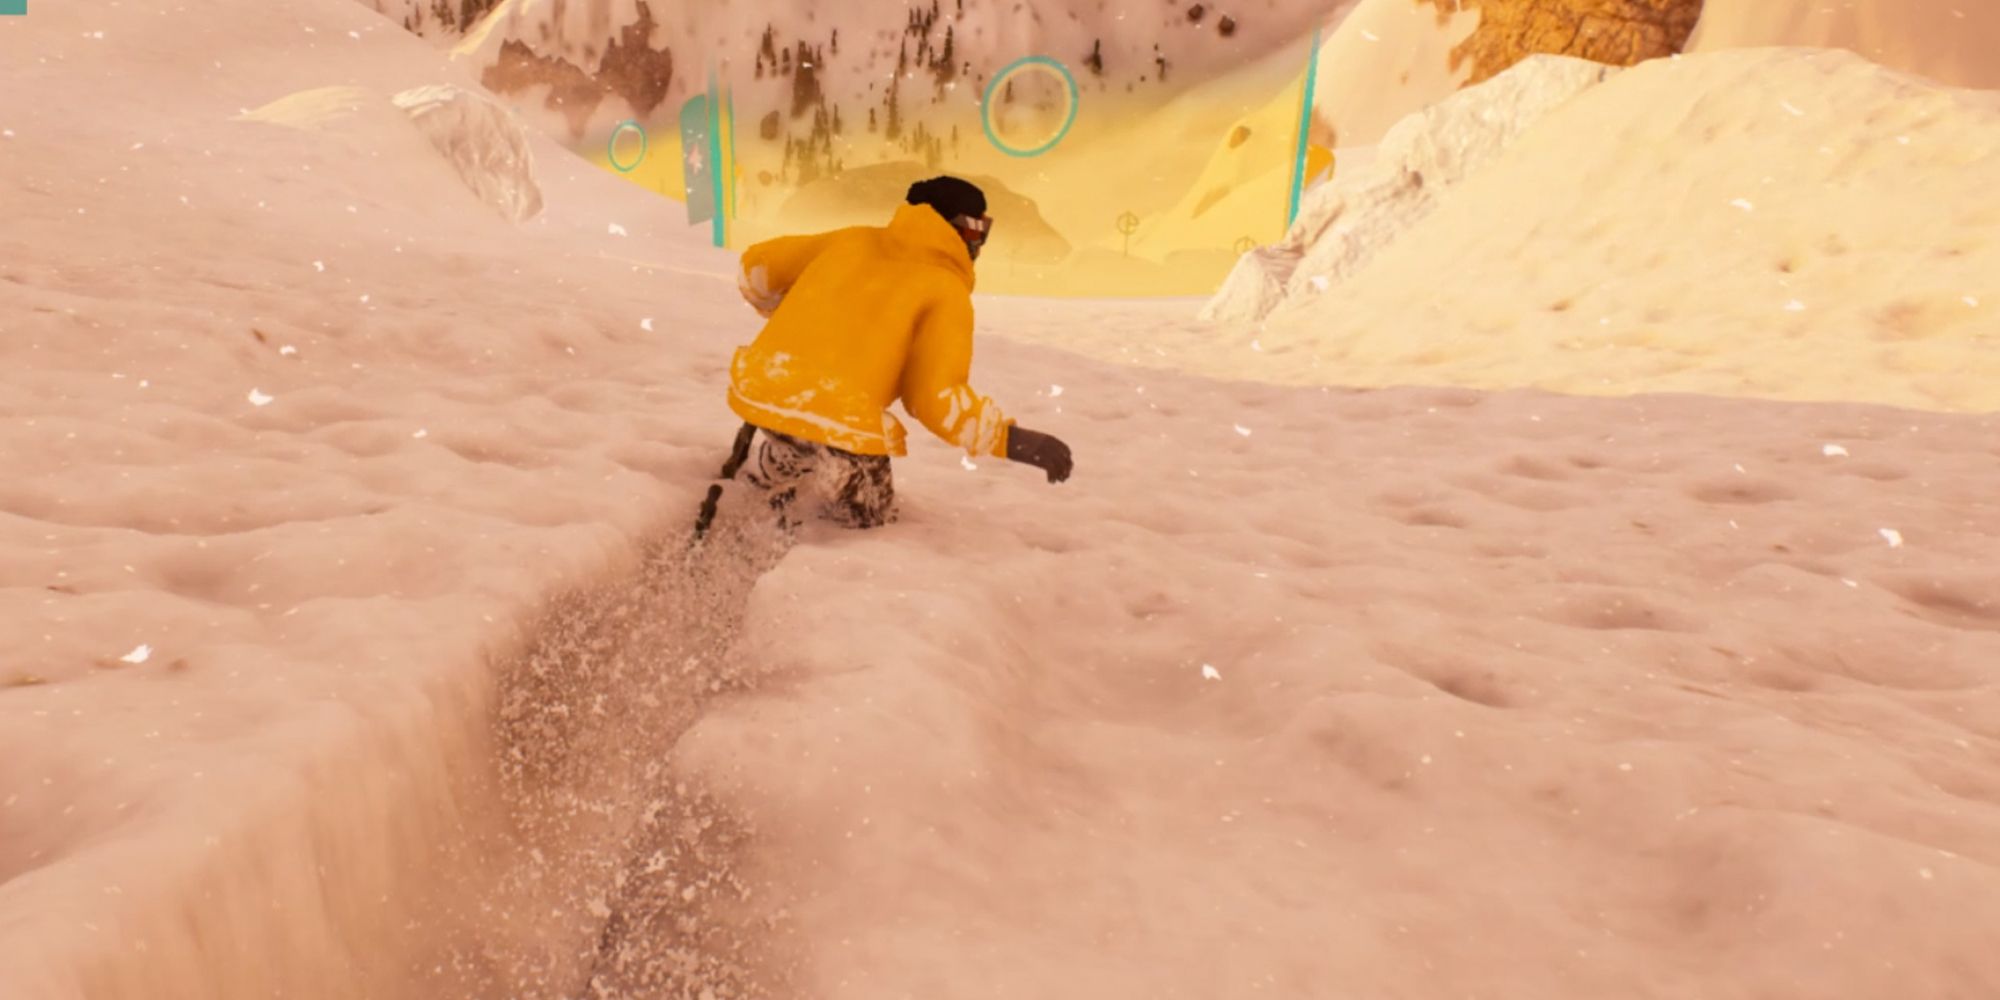 Riders Republic. Yellow jacket, riding on snowboard in deep snow.